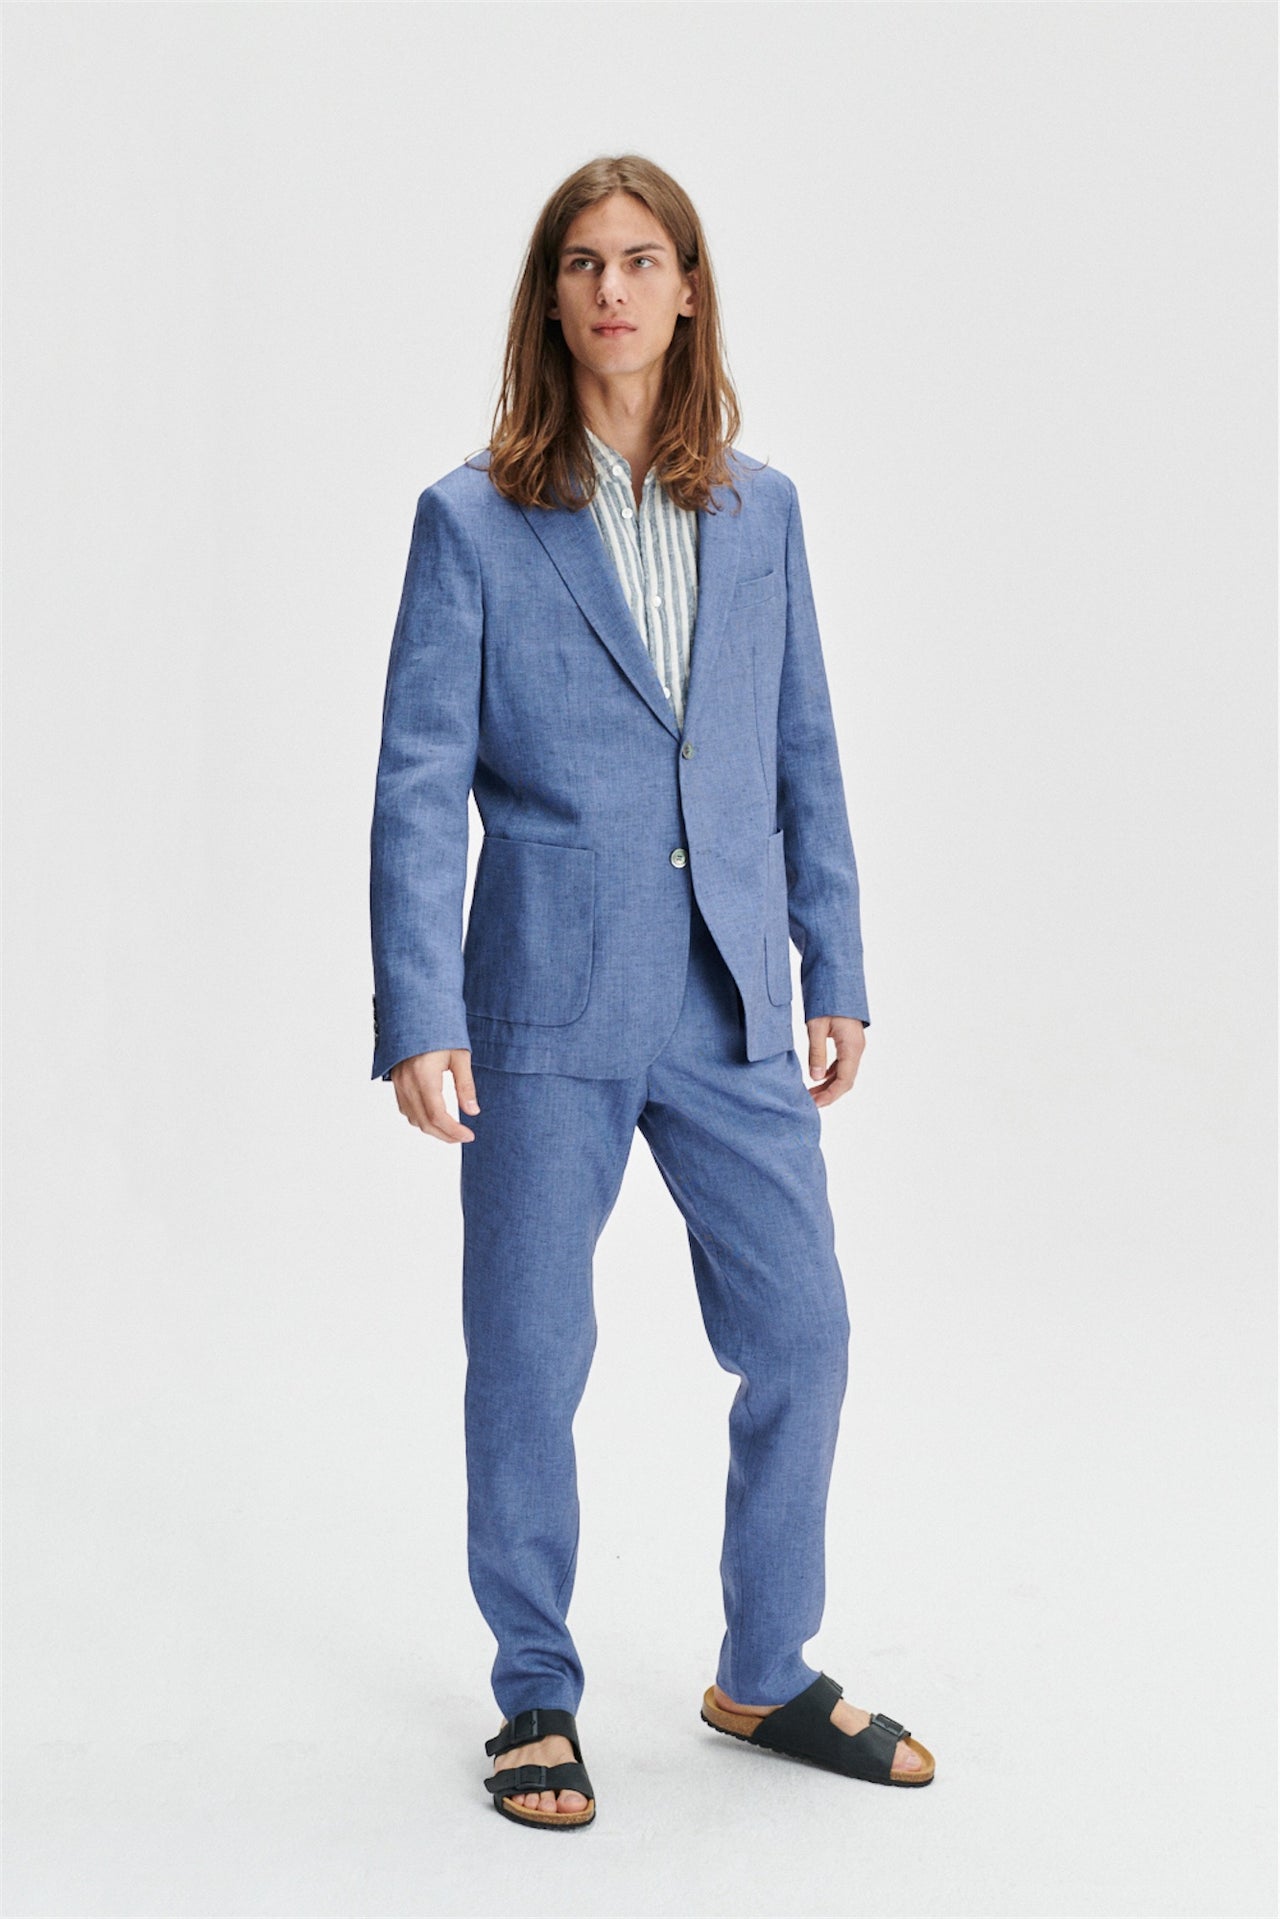 Smart Relaxed Blazer in a Natural Stretch Navy and Pilot Blue Italian Traceable Linen